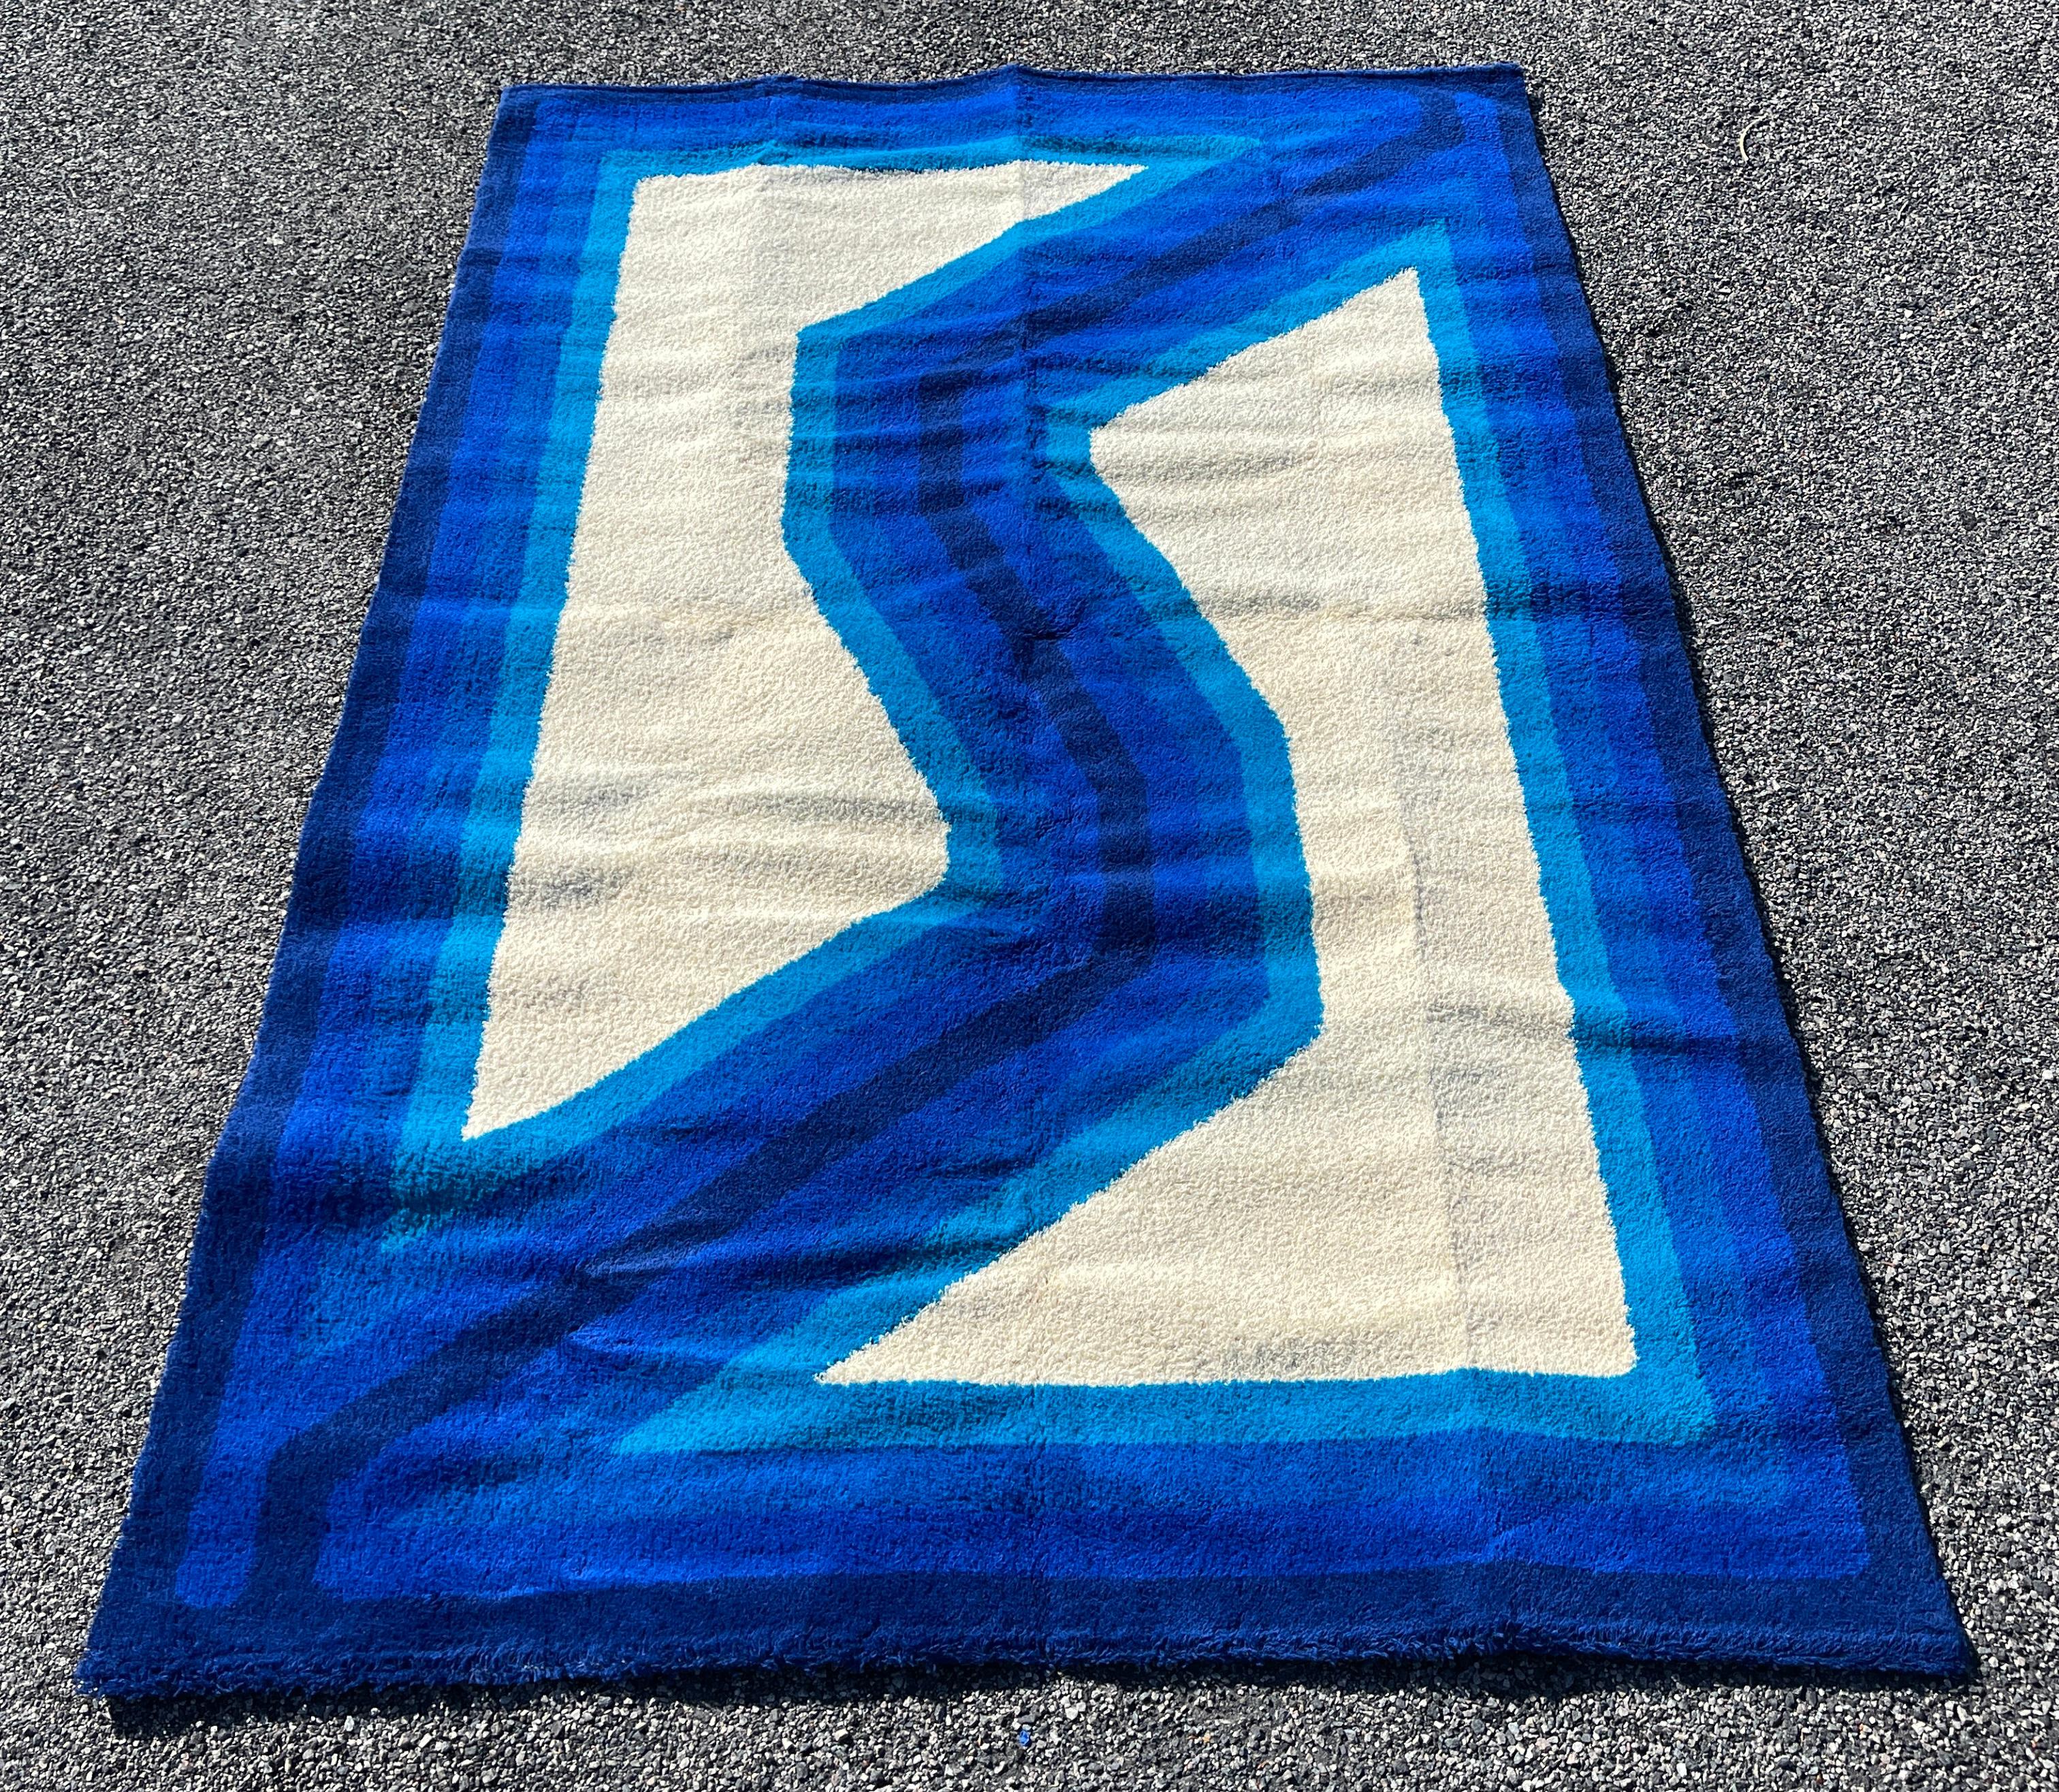 Vintage rectangular Danish rya rug, tones of blue on off-white, 100% wool, produced in the 1960's but never used. Has been kept rolled and wrapped in storage for over 50 years. Your feet will be the very first to walk on it. Produced in Denmark by